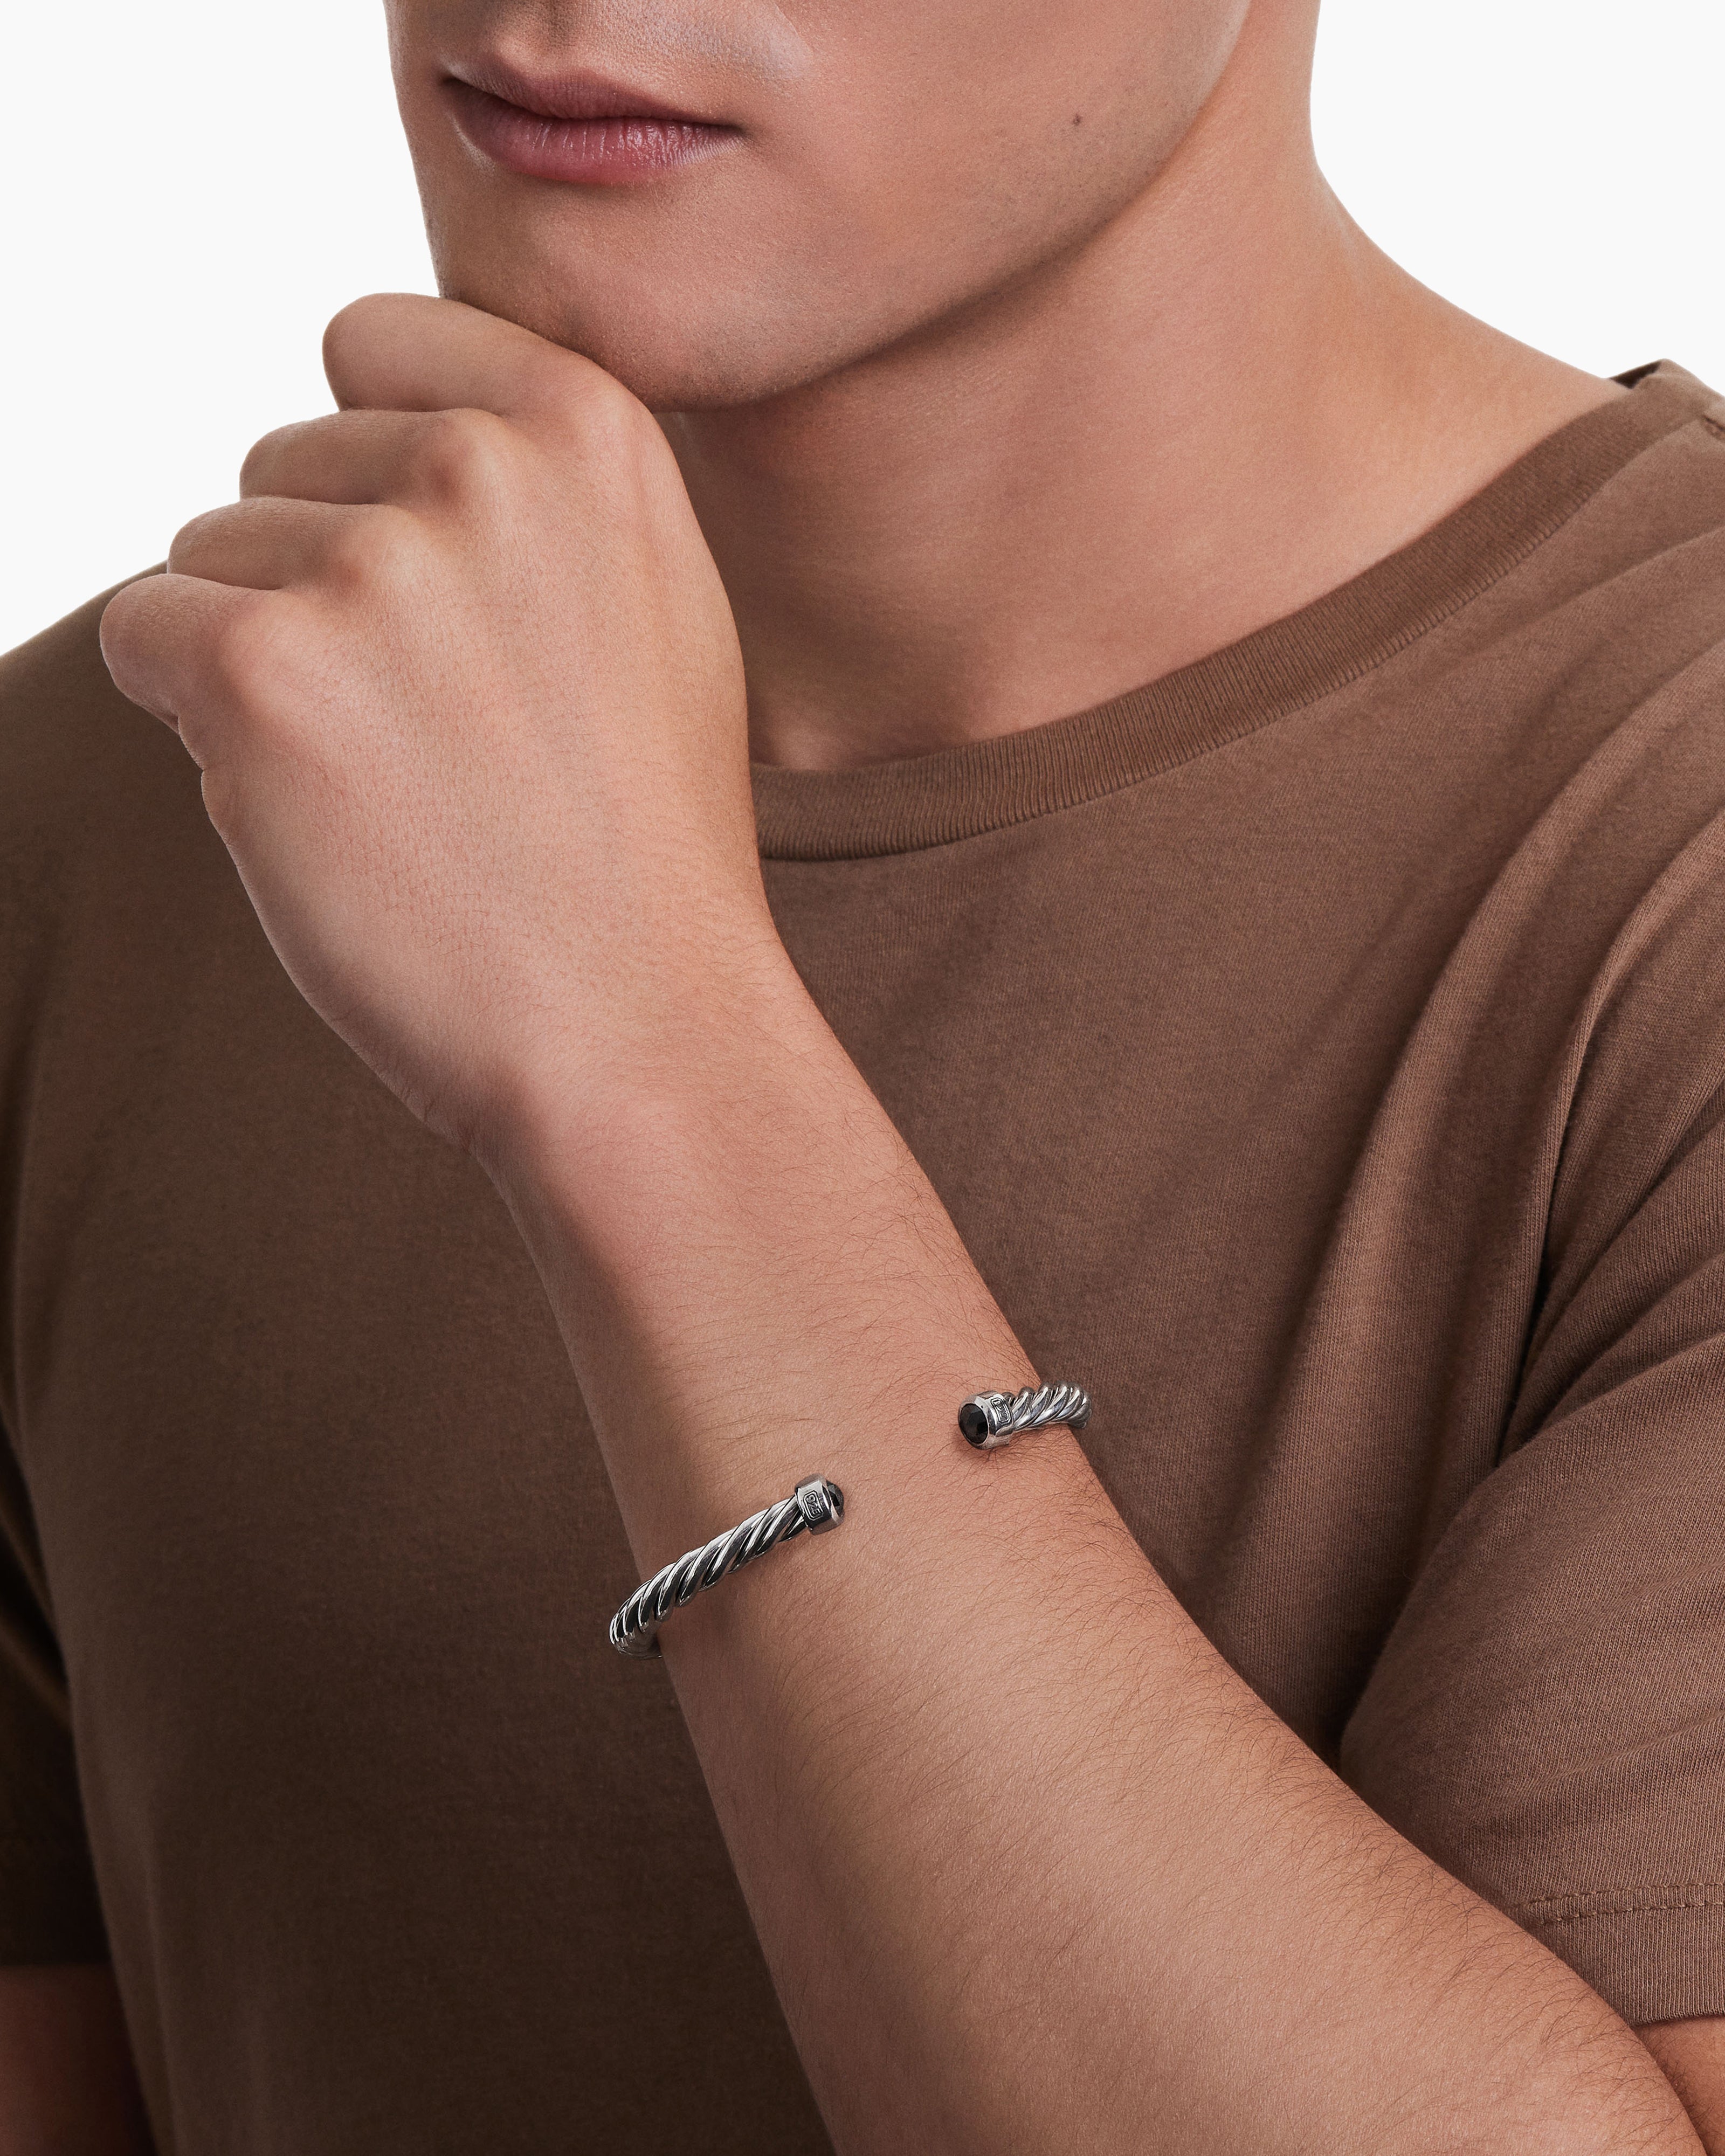 5MM Silver Twisted Cuff Bangle Bracelet For Men And Women Designer Hook  Charm Bracelet Exquisite Simple Fashion Cable Mens Jewelry Accessories From  Chanel_store, $21.12 | DHgate.Com